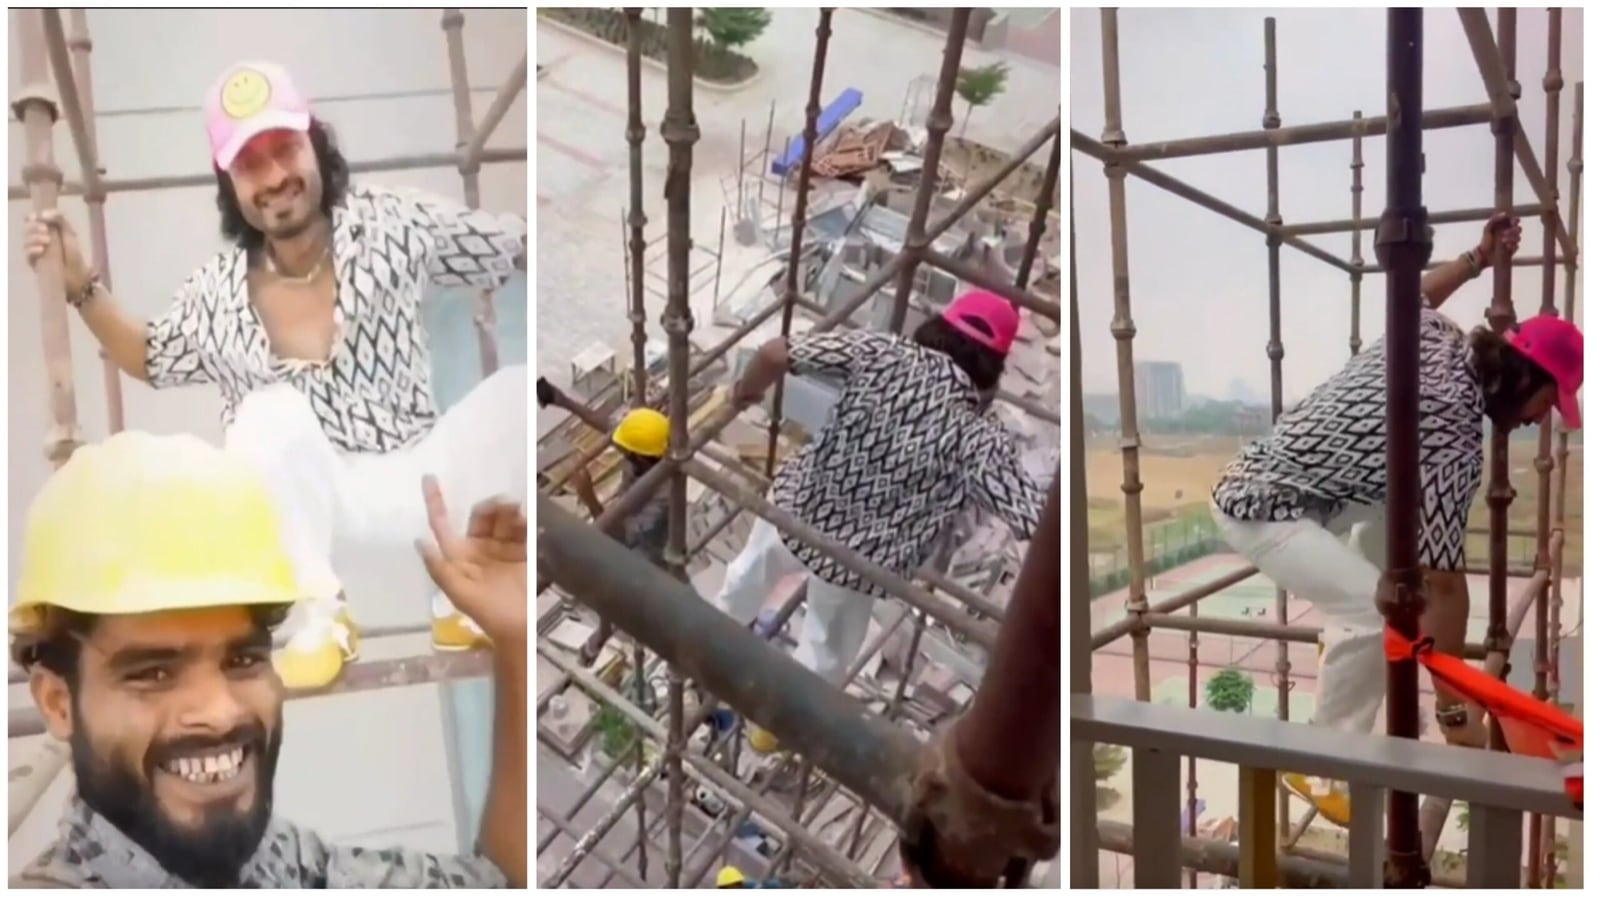 Vidyut Jammwal climbs down scaffolding from balcony to click selfie with construction worker, fans impressed. Watch